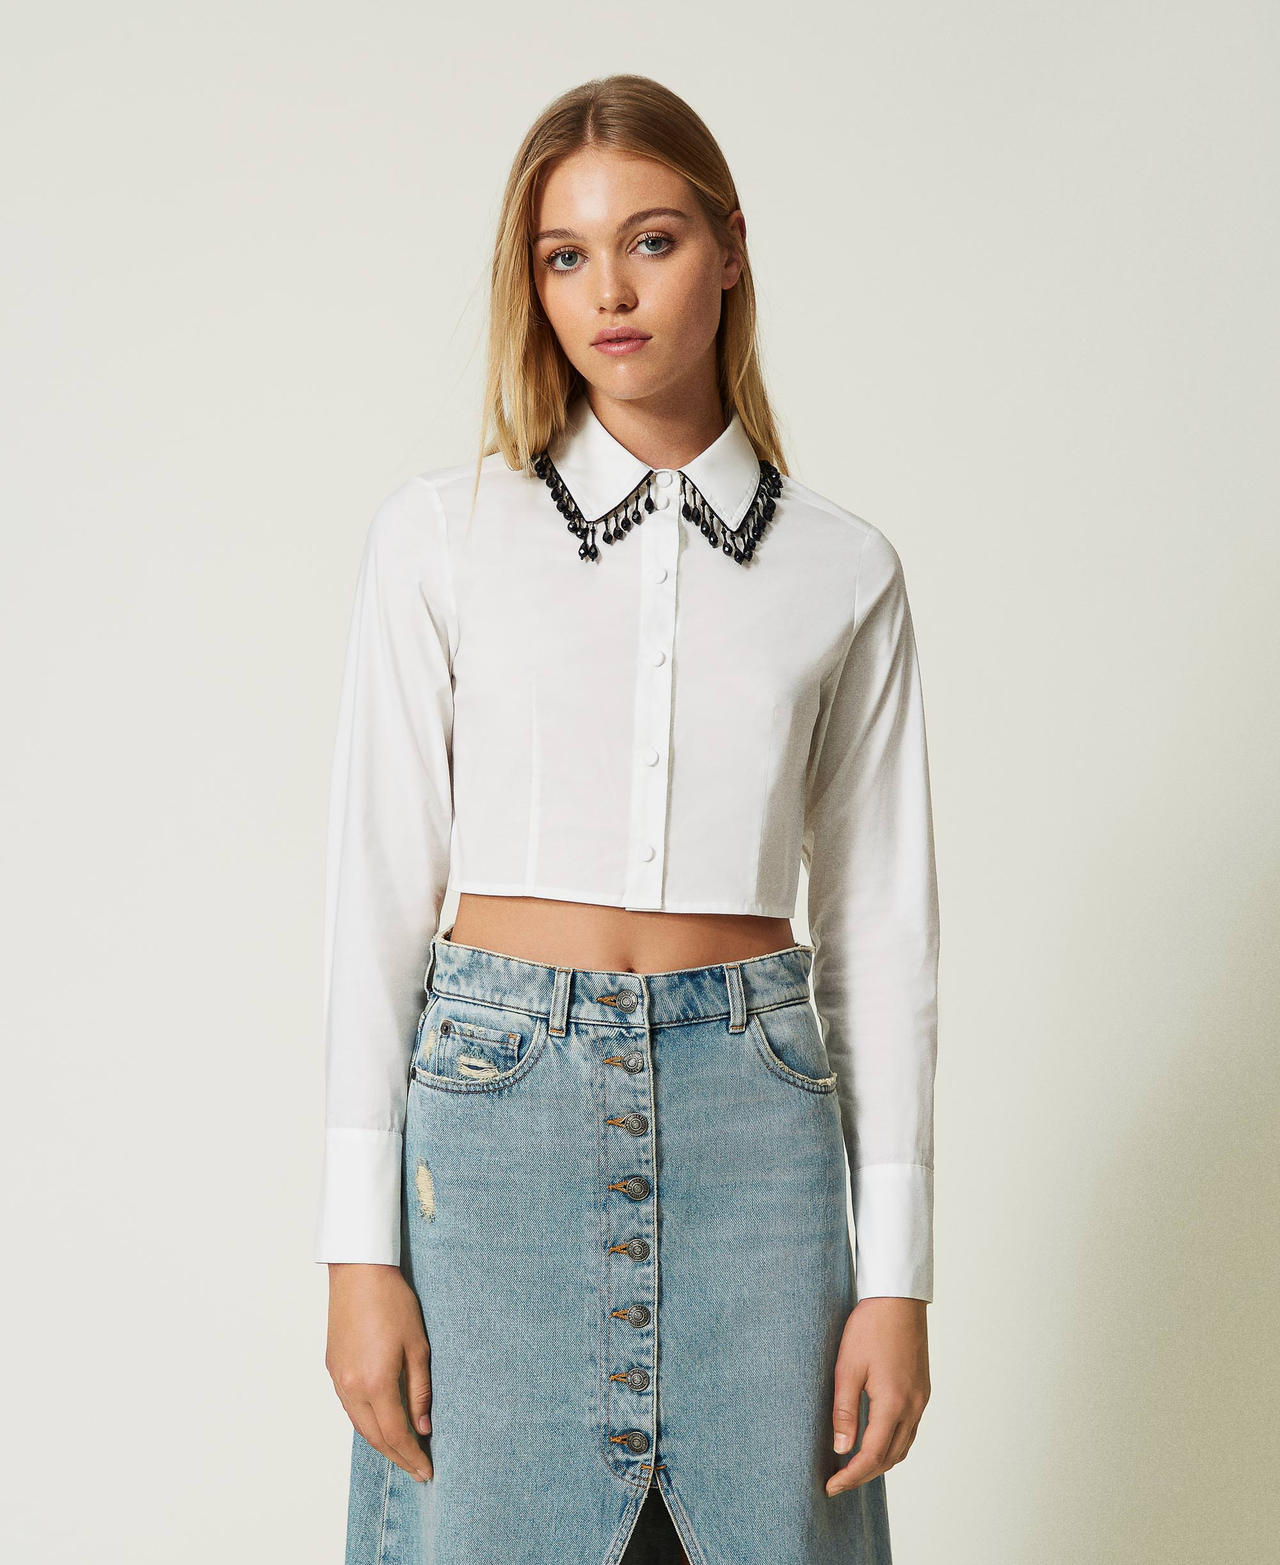 Cropped shirt with embroidered collar Lily Woman 232AP2280-02